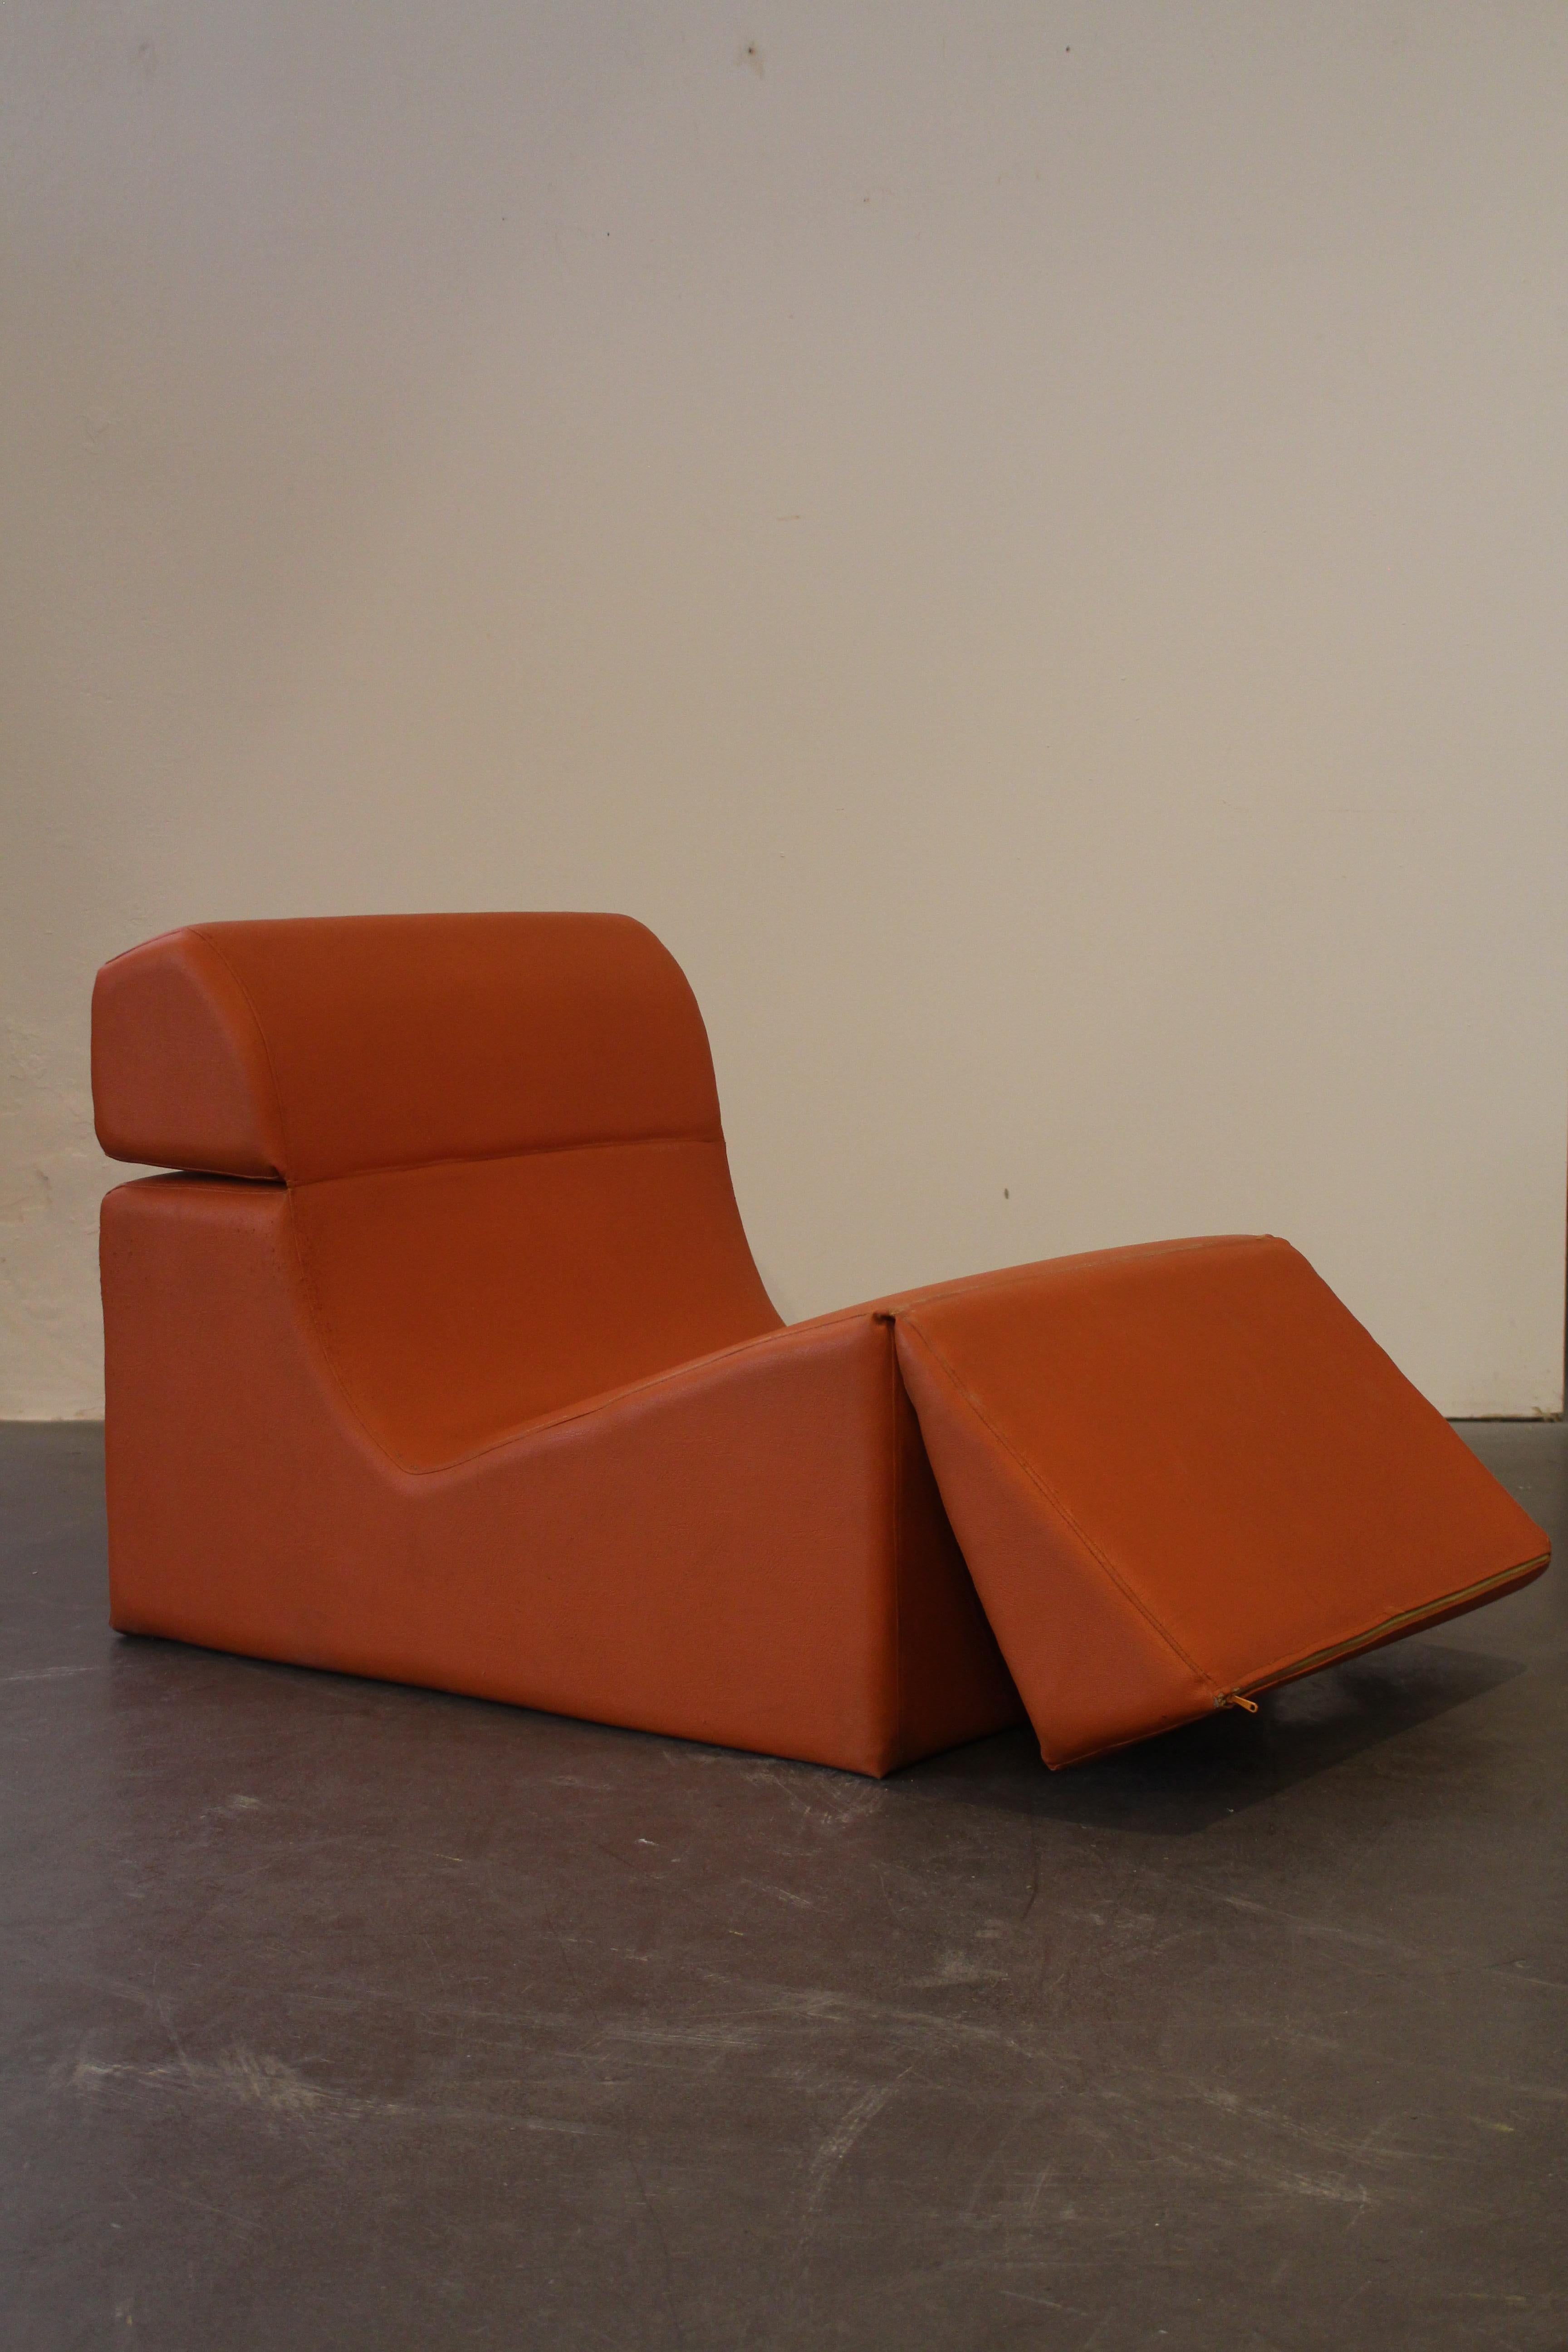 Space Age 1970, Set of 2 Armchairs by Jean-Paul Barray